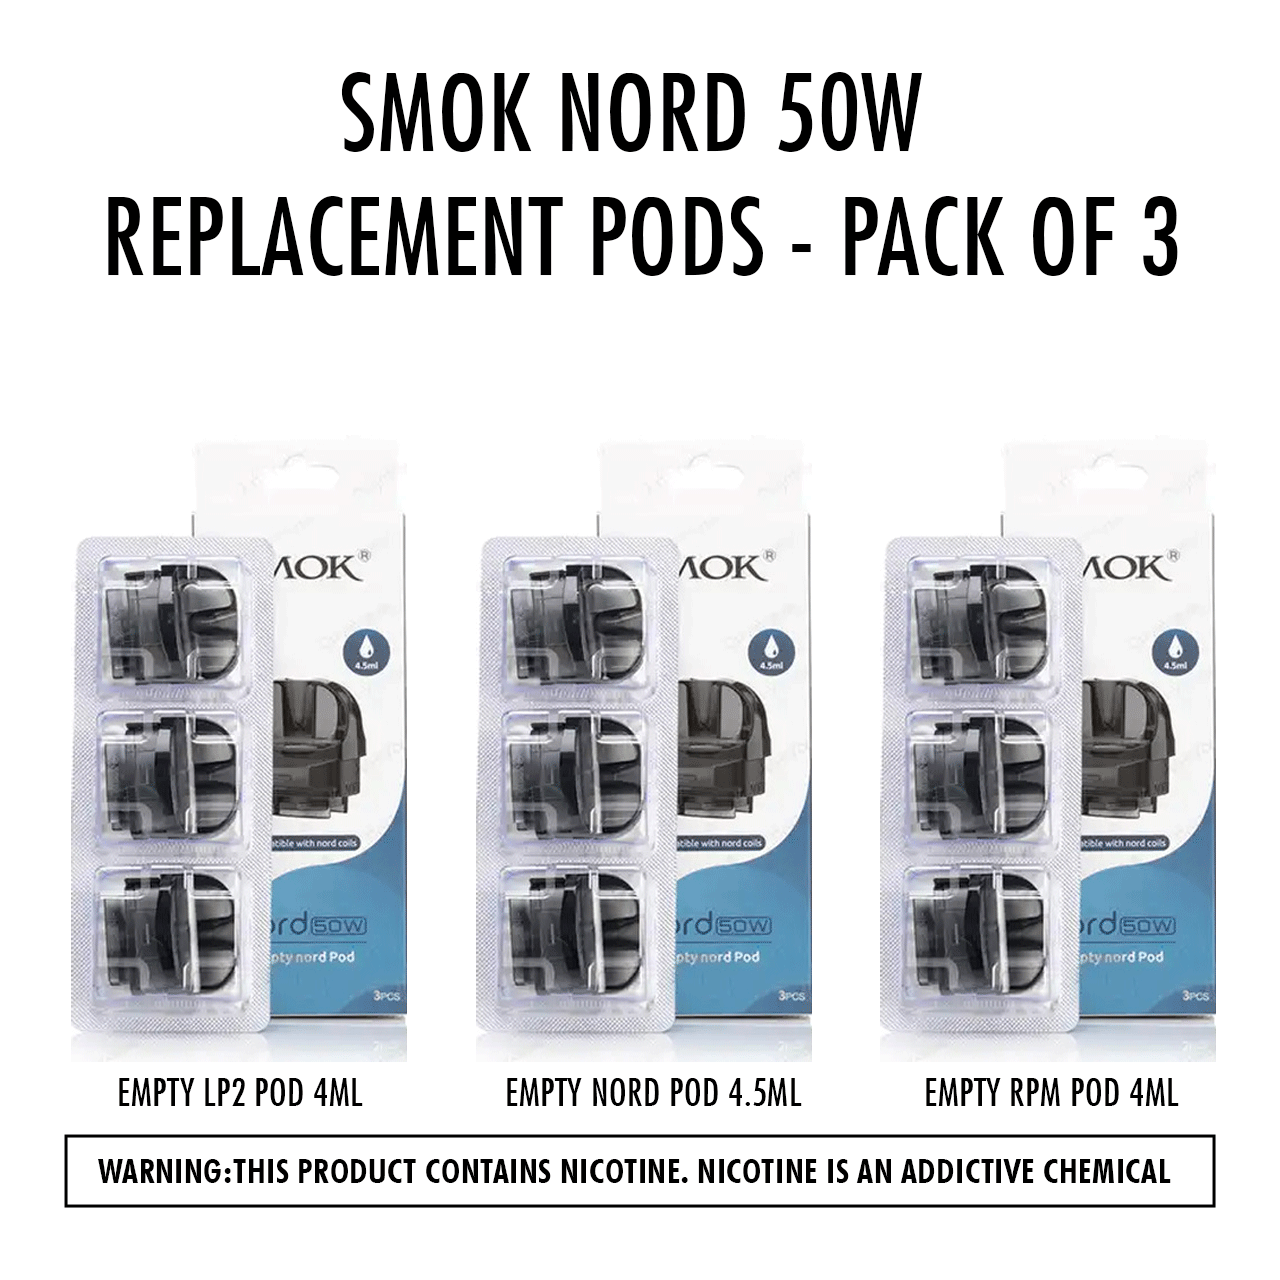 Smok Nord 50W Replacement Pods - Pack Of 3